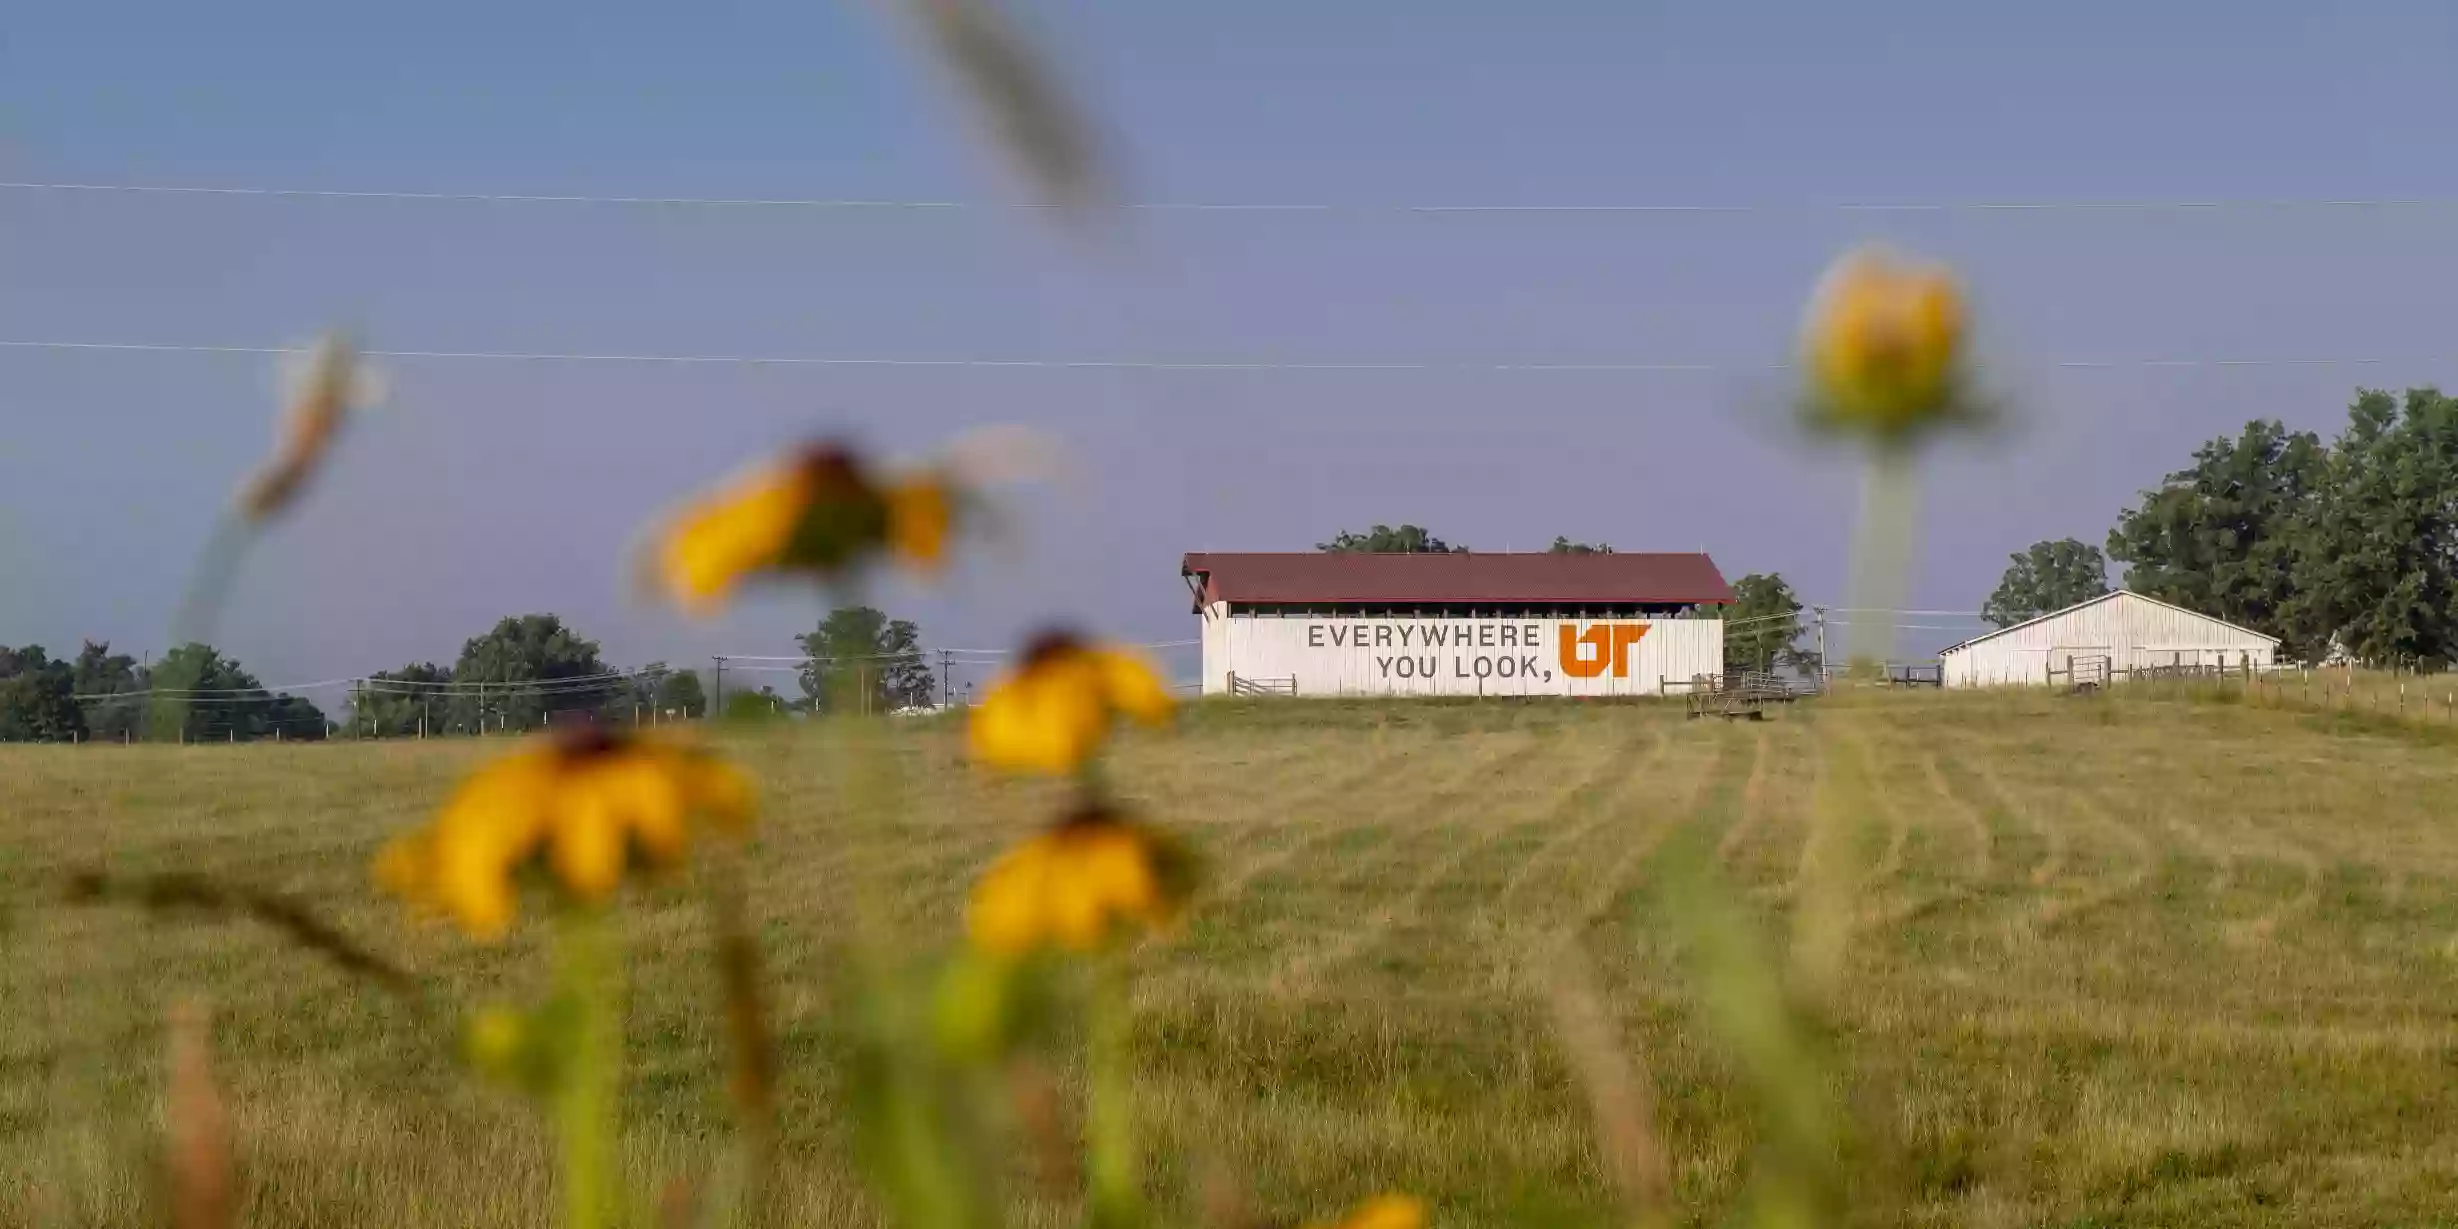 University of Tennessee Agricultural Extension Agency